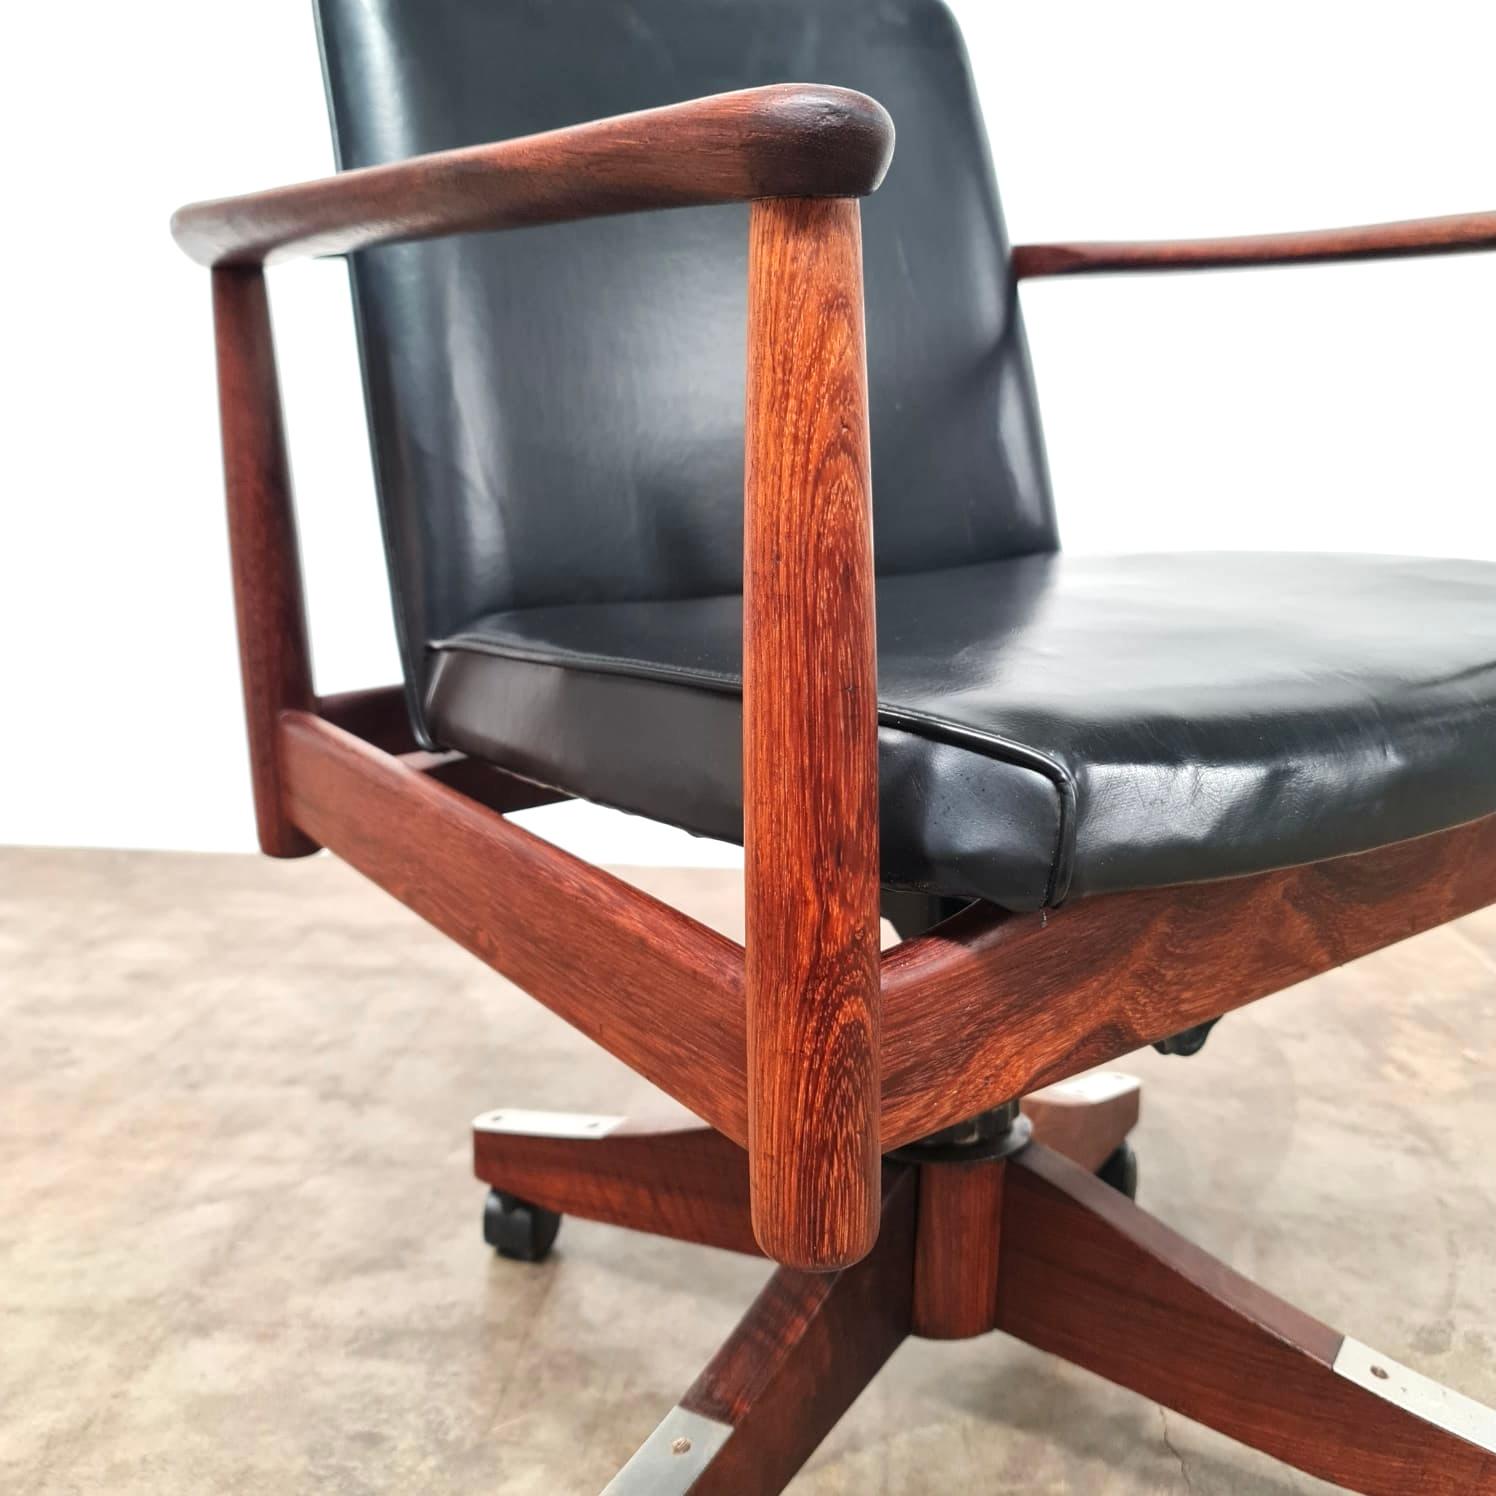 Lean back into a life of diplomatic trade agreements with this Arthur Stutchbury office chair. Blackbean frame with vinyl cushions freshly restored. Swivels, reclines and rolls.

Adjustable H 88cm, W 63cm, D 56cm

Located in Wollongong